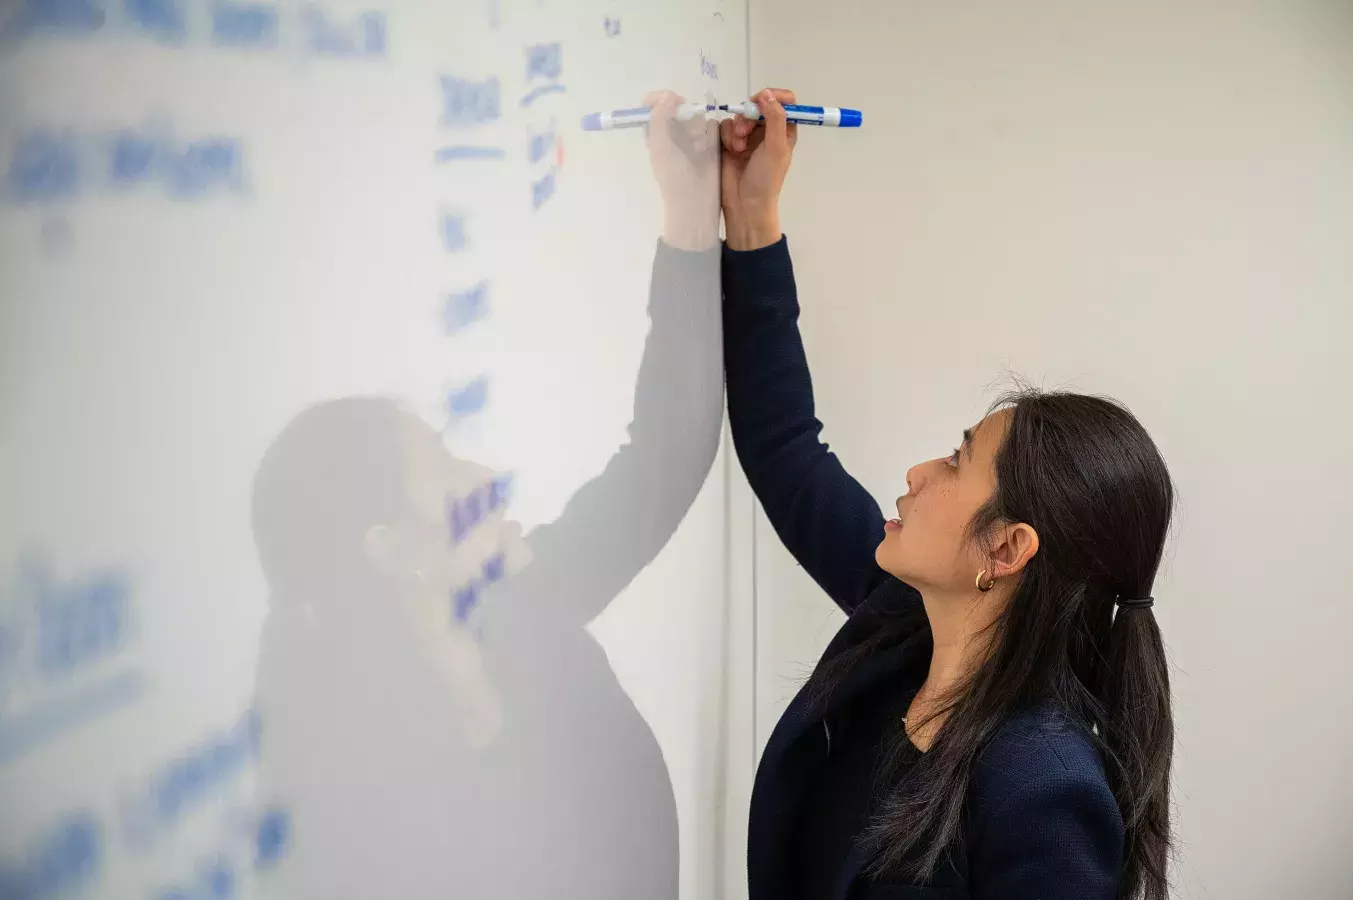 cil person writing with an erasable marker on a board